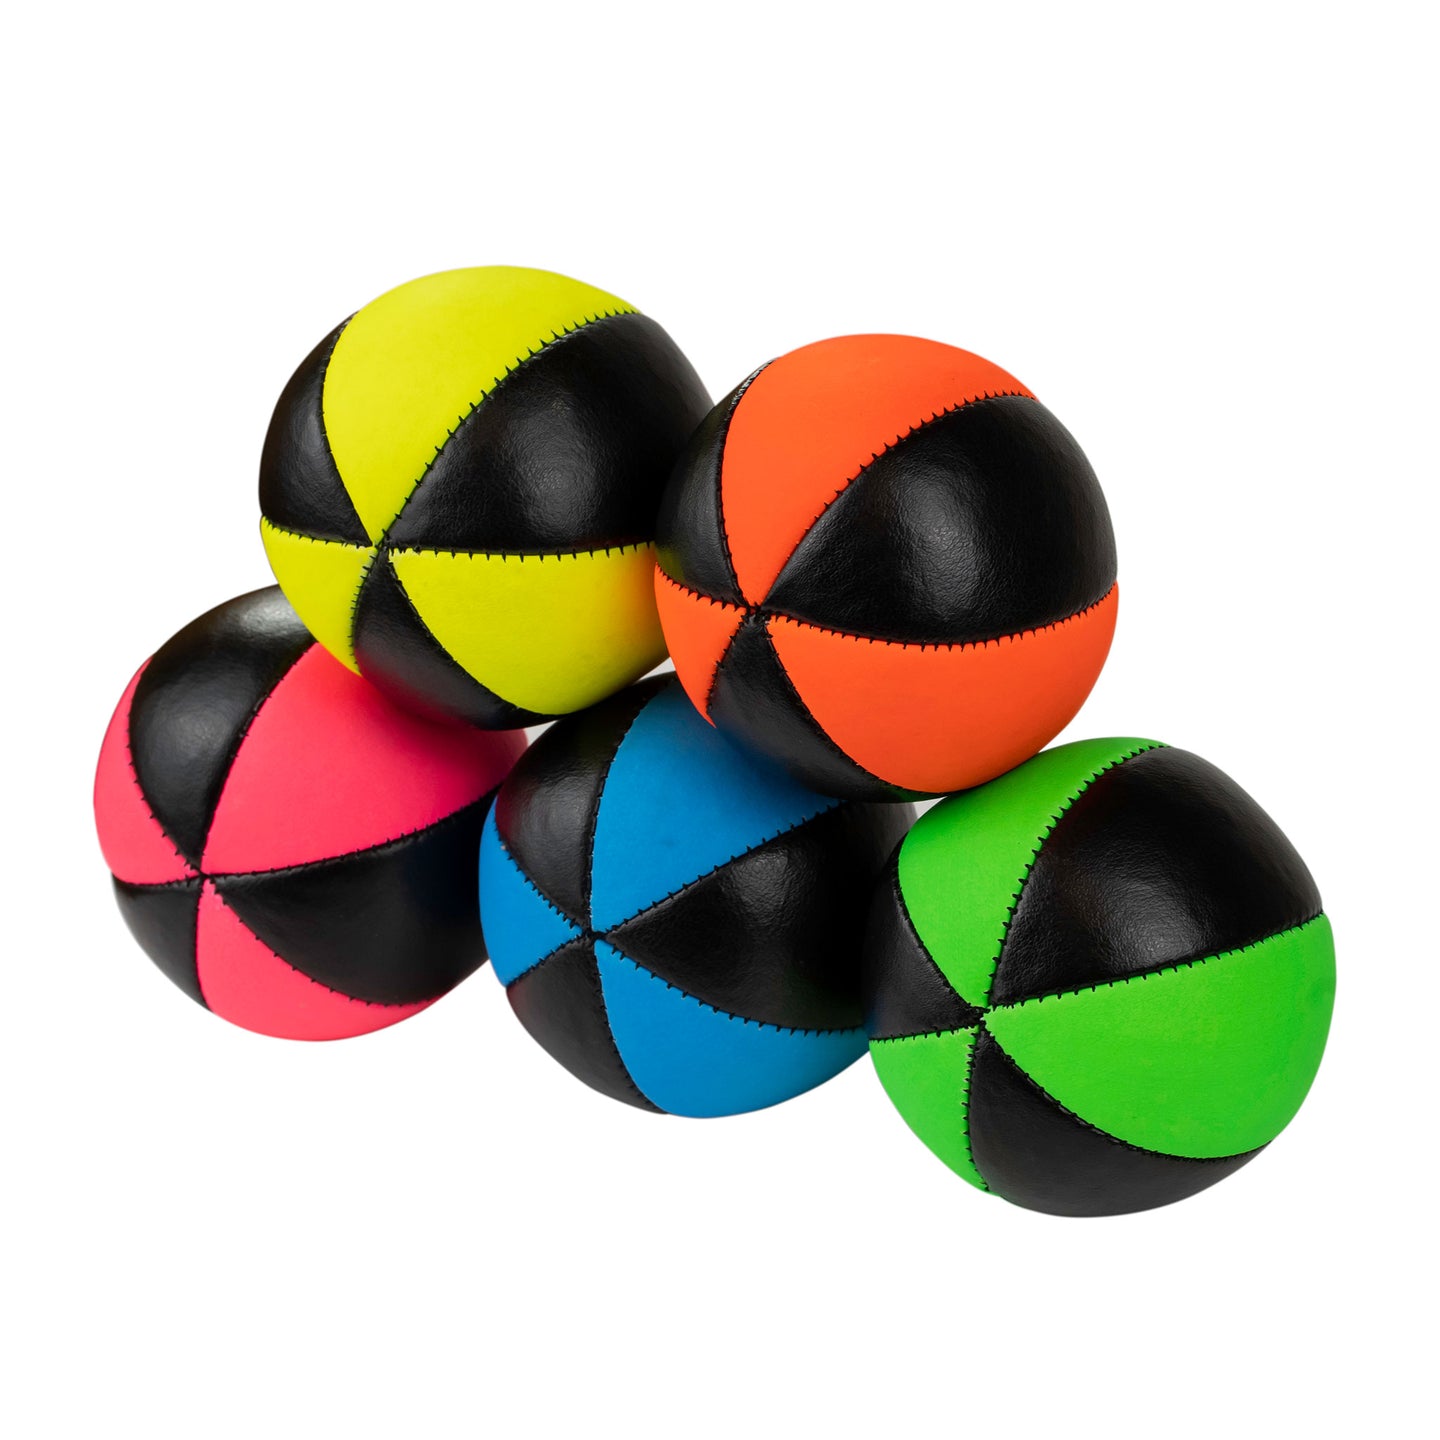 2 Juggling Balls on top of 3 - all colours